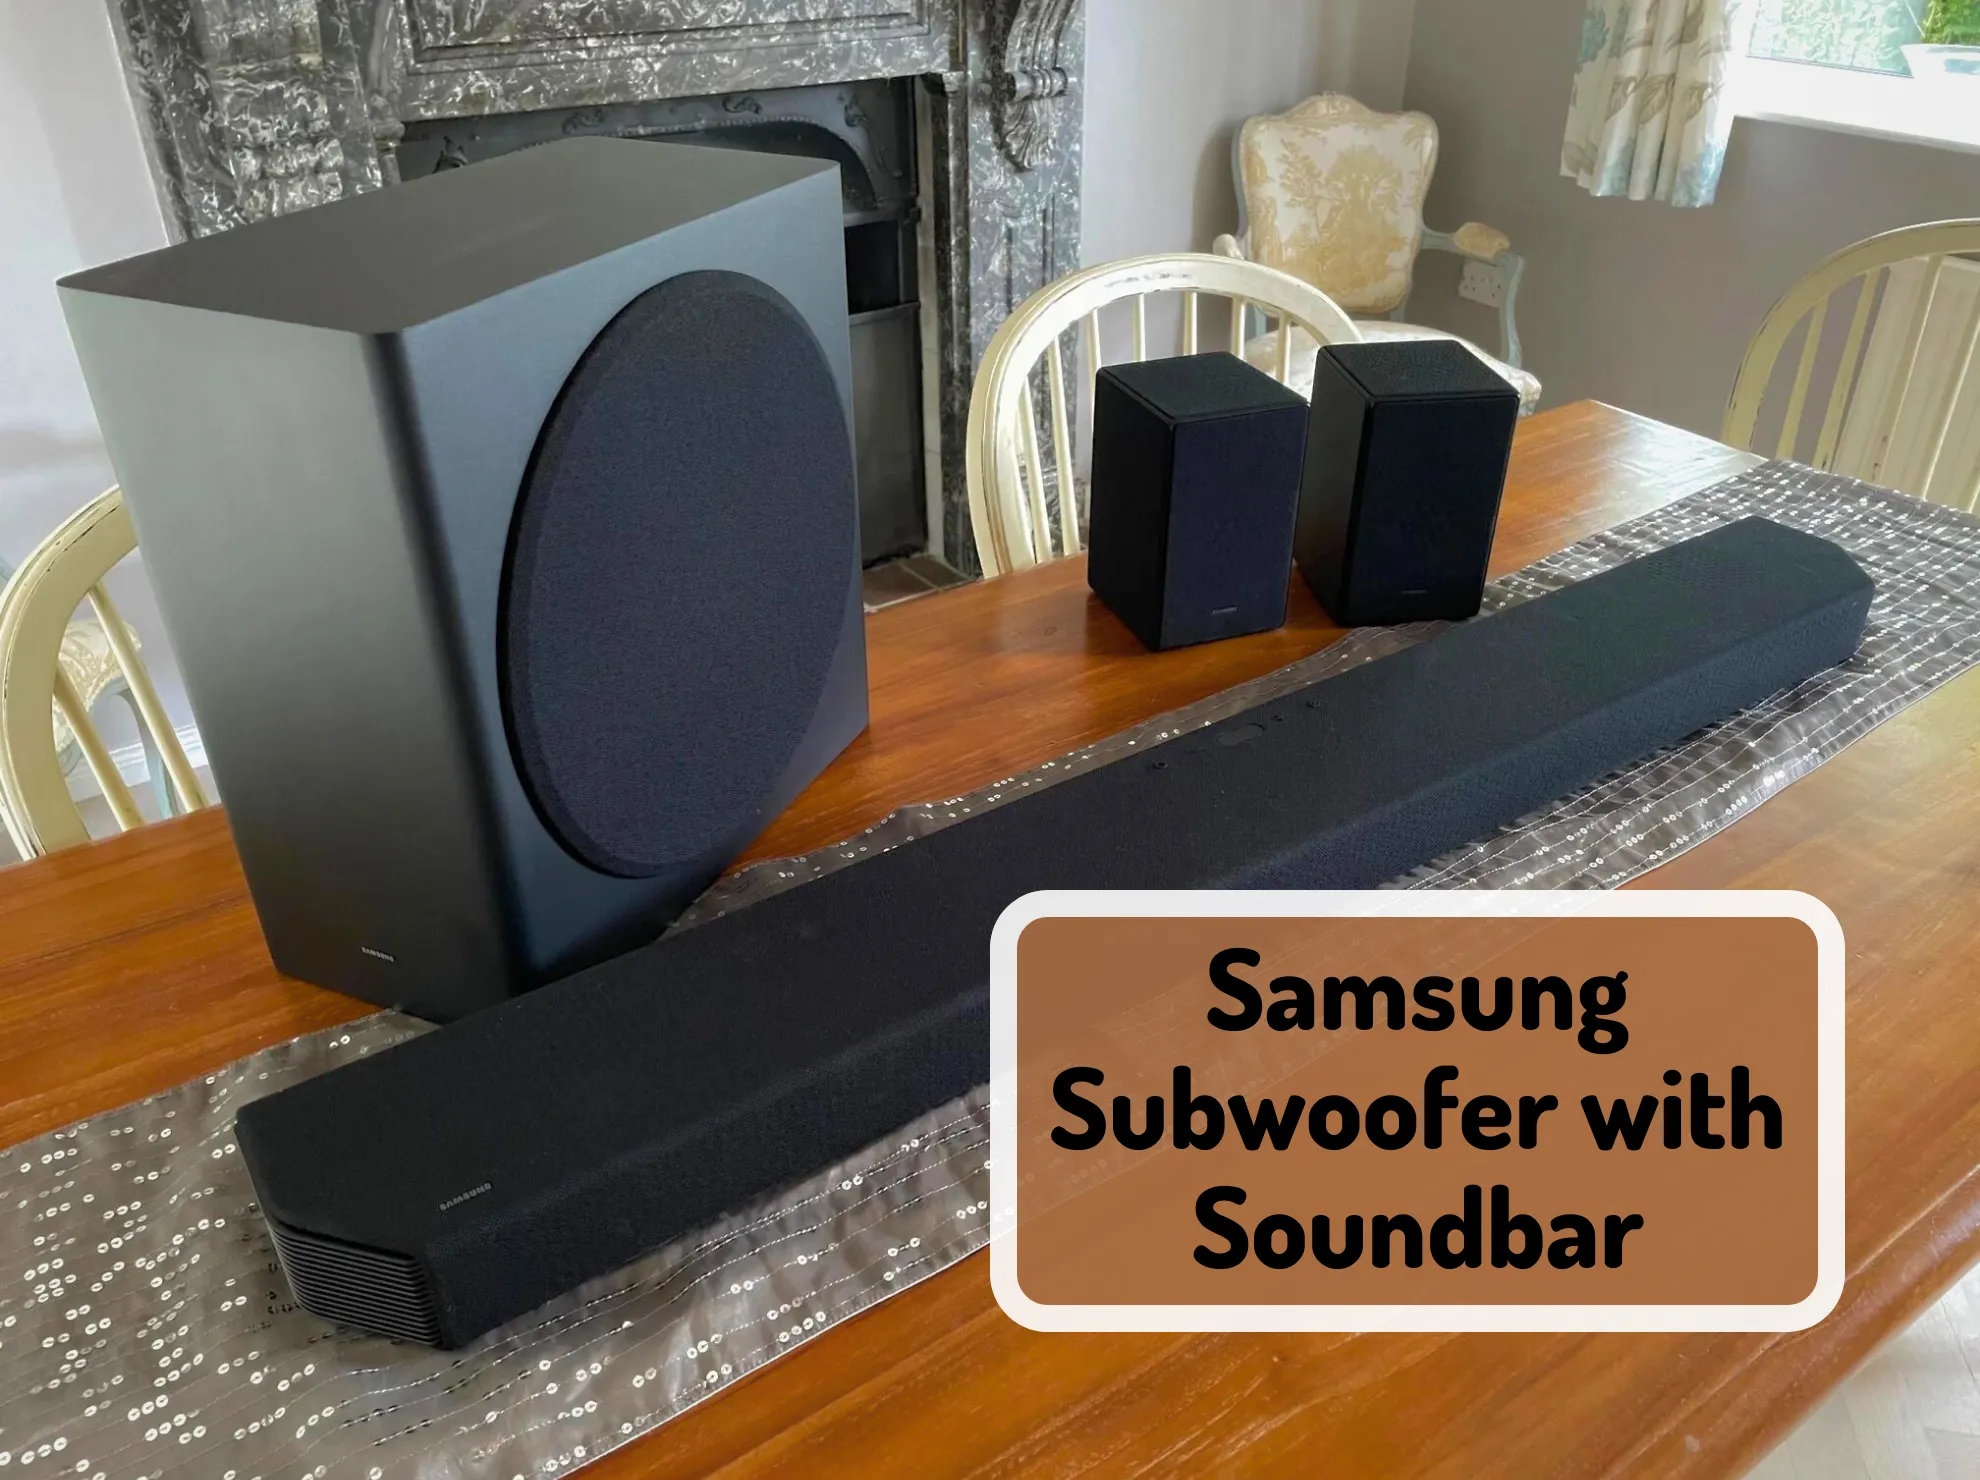 Where to Place Samsung Subwoofer with Soundbar